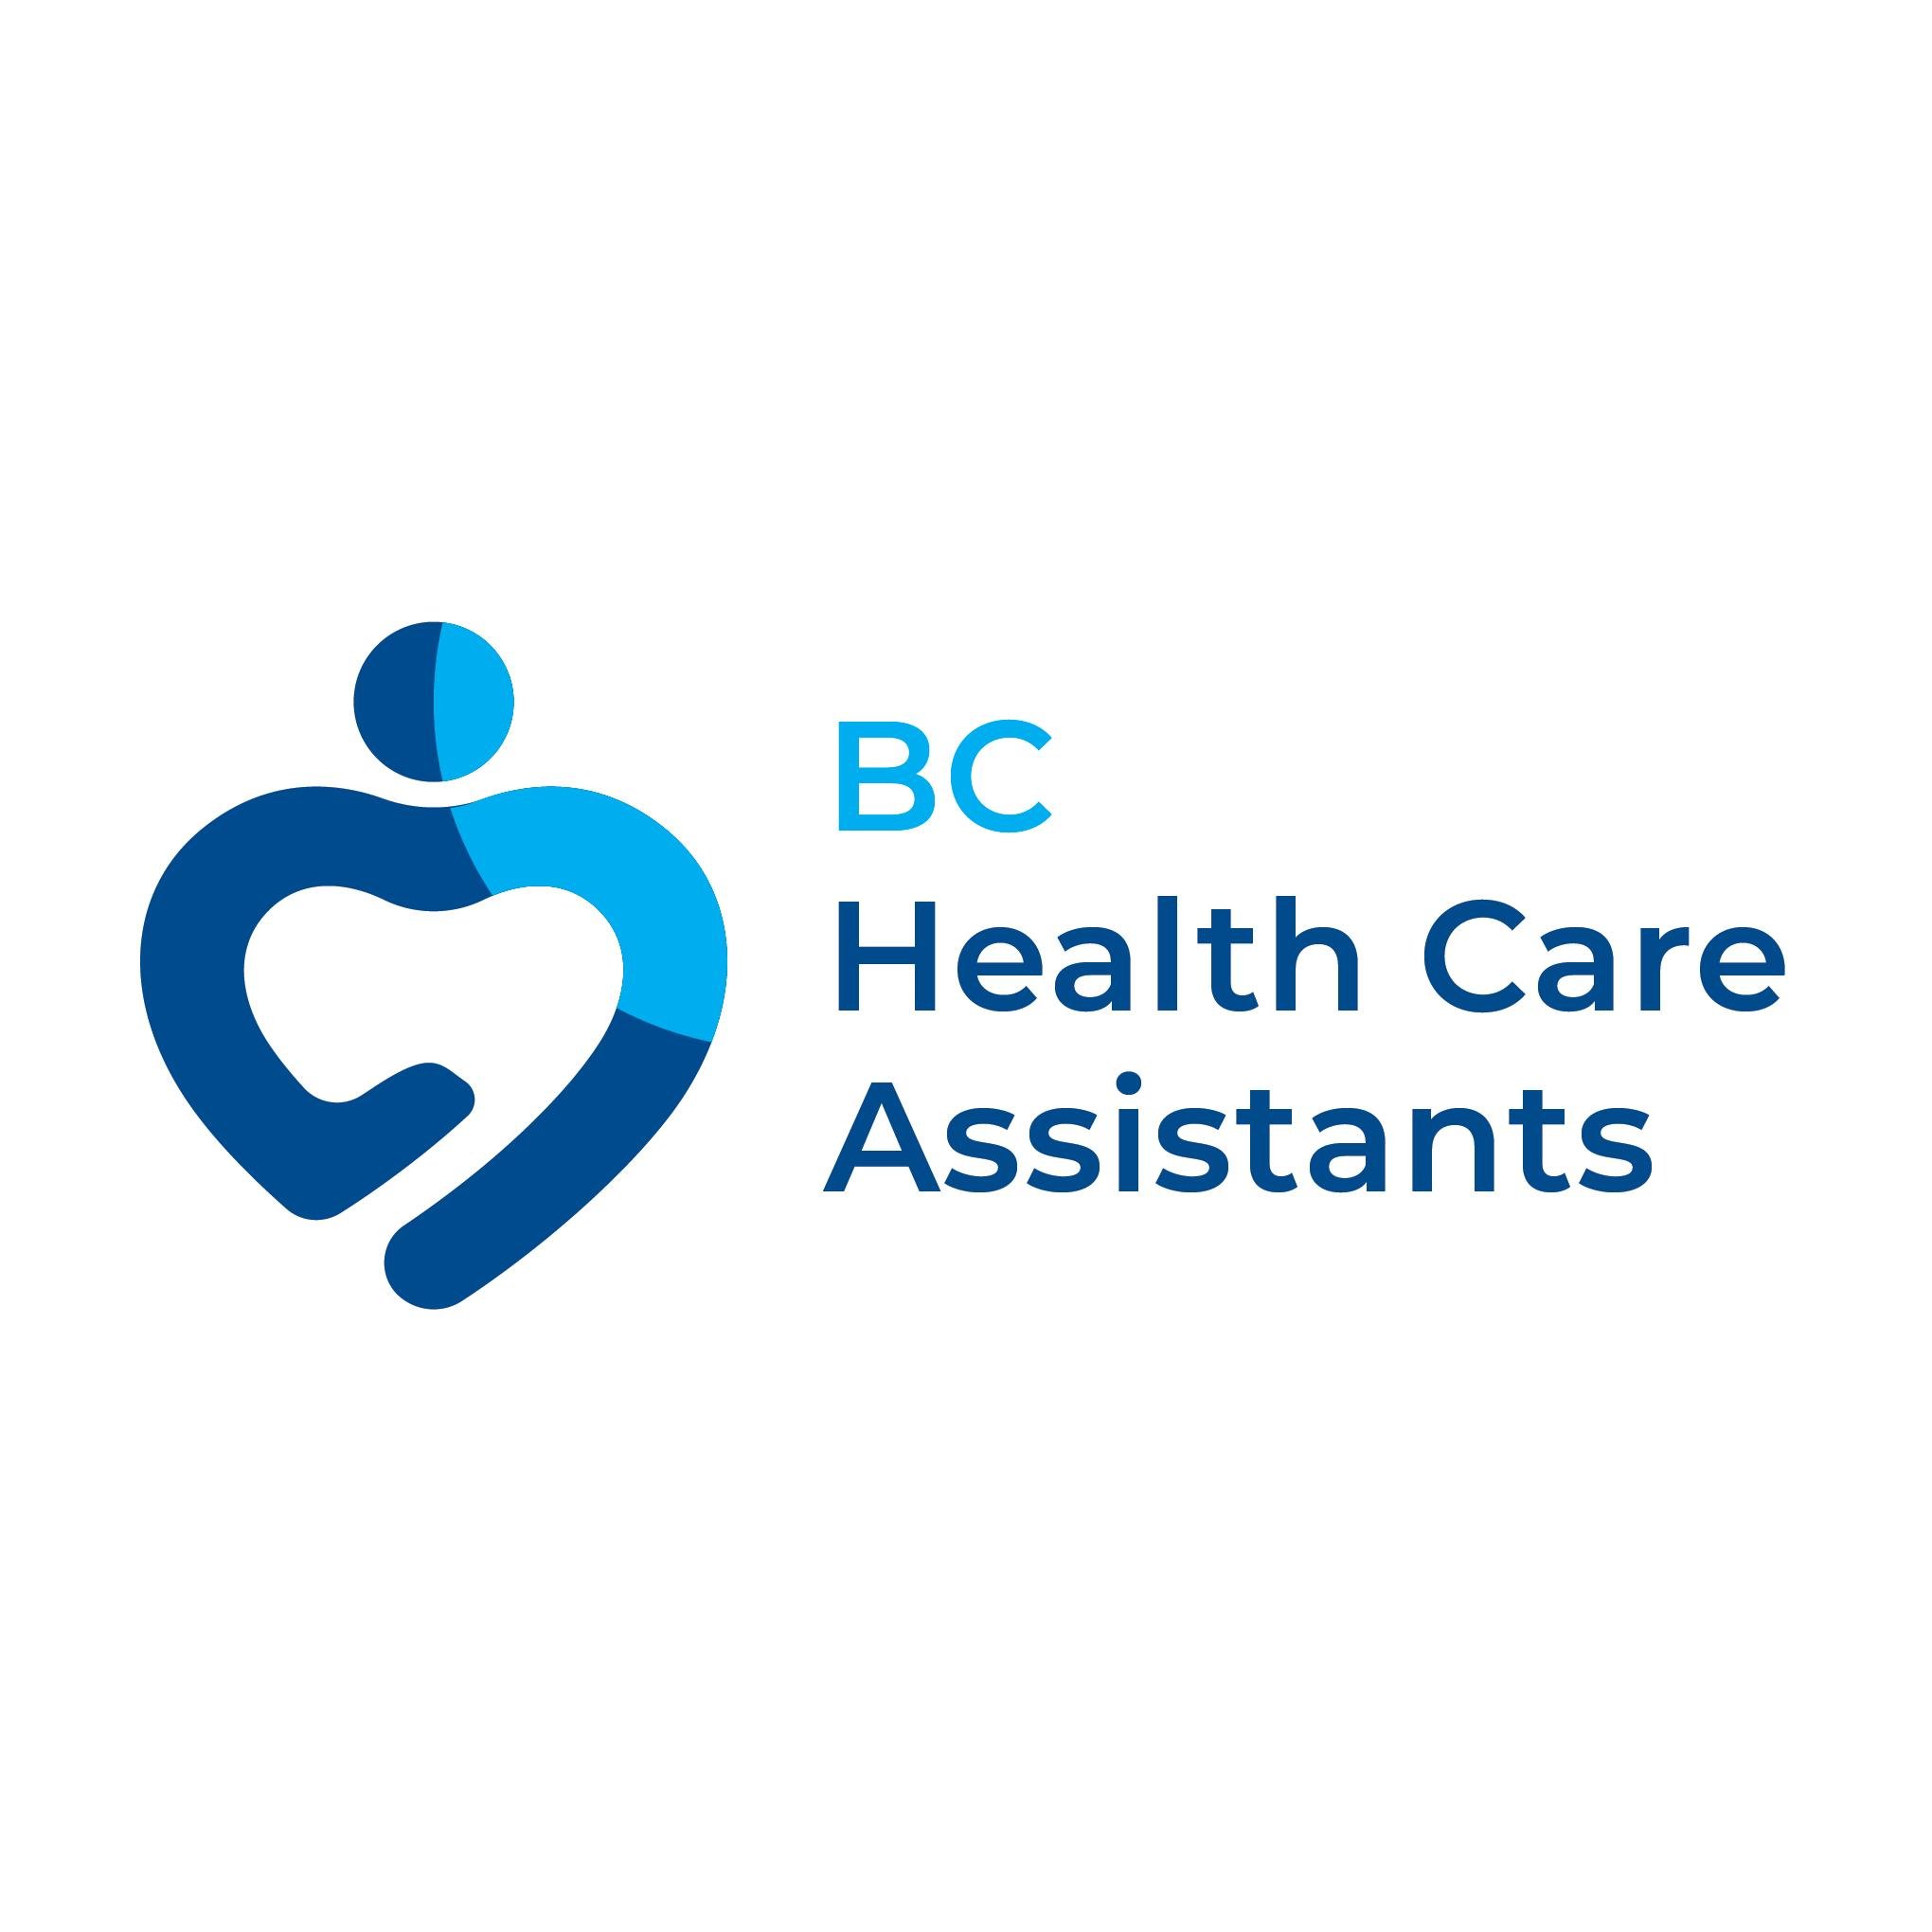 Choose2care is a website that provides the public with relevant information regarding training, employment, and registration as a Health Care Assistant in BC.